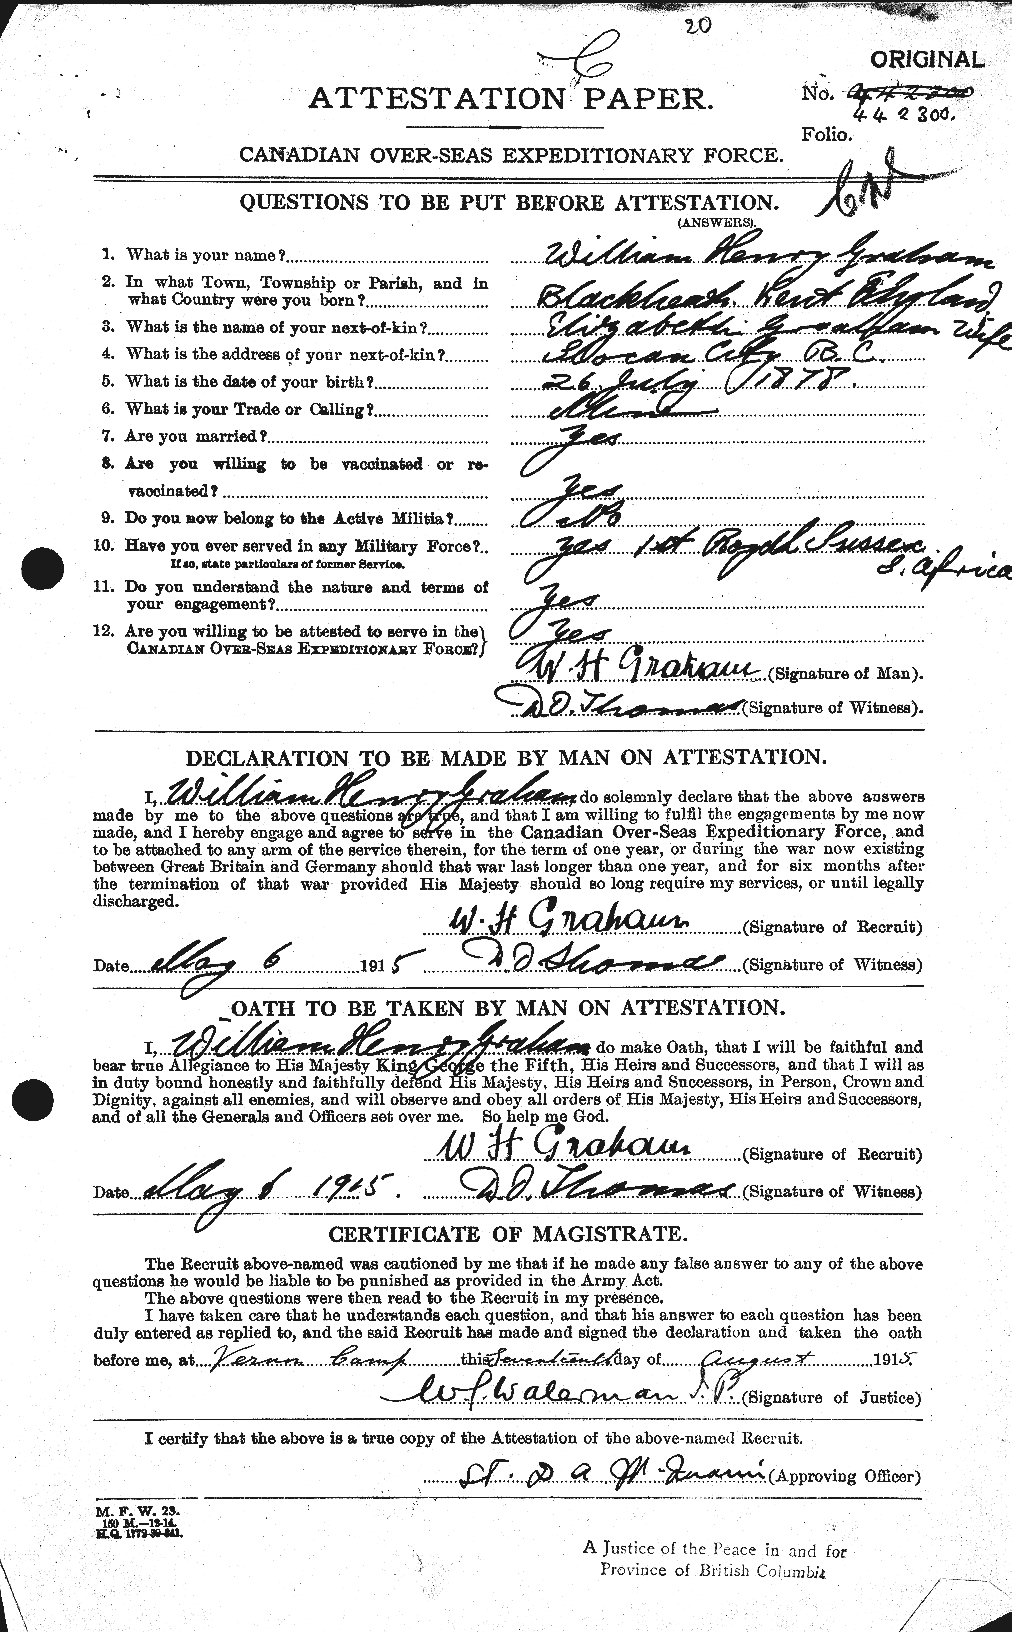 Personnel Records of the First World War - CEF 358002a